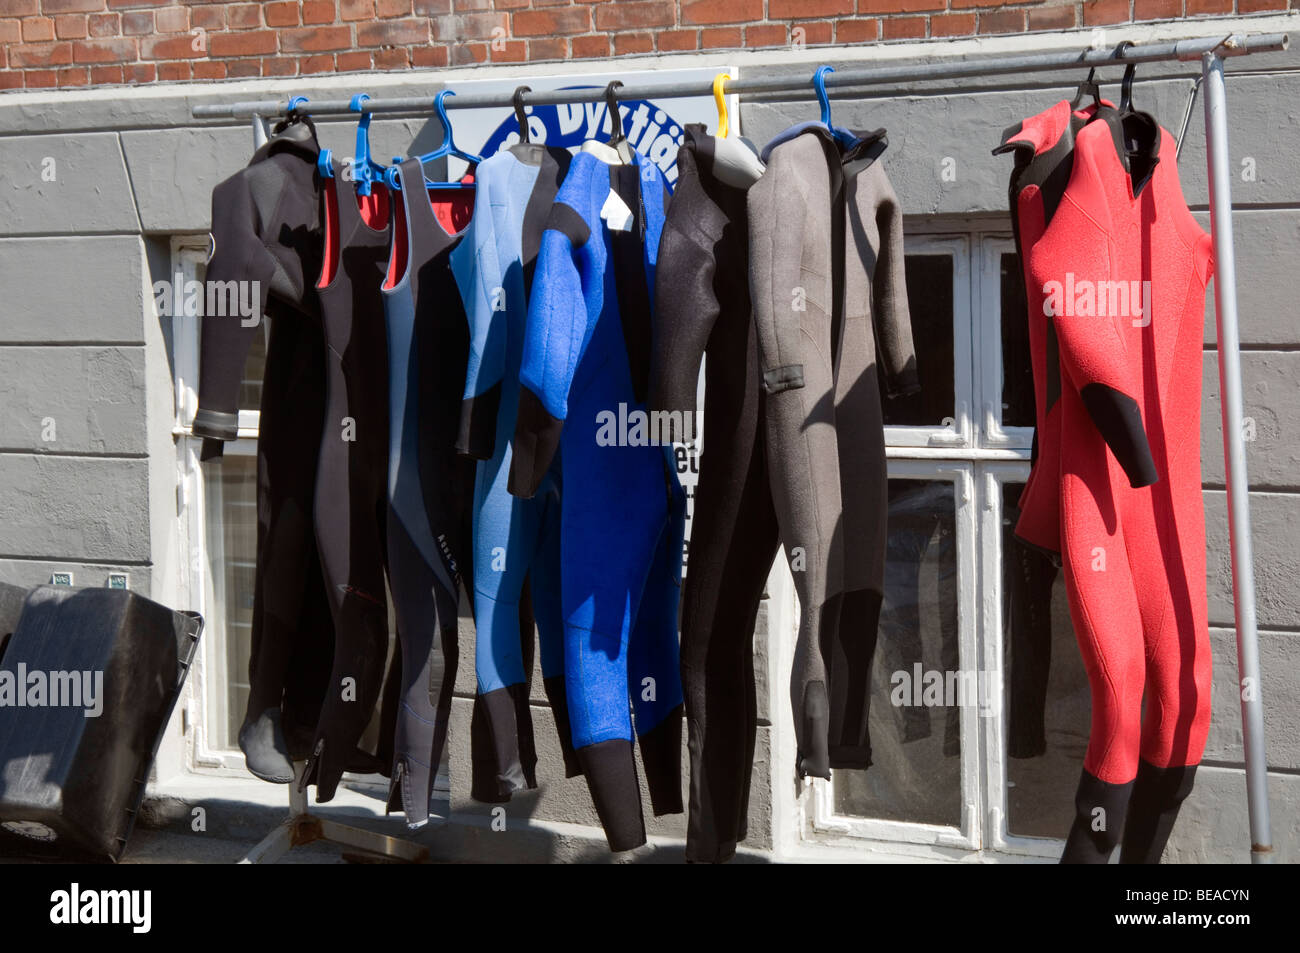 wet suit suits wetsuit wetsuits diving diver divers neoprene school party group lesson learning to learn instructor Stock Photo